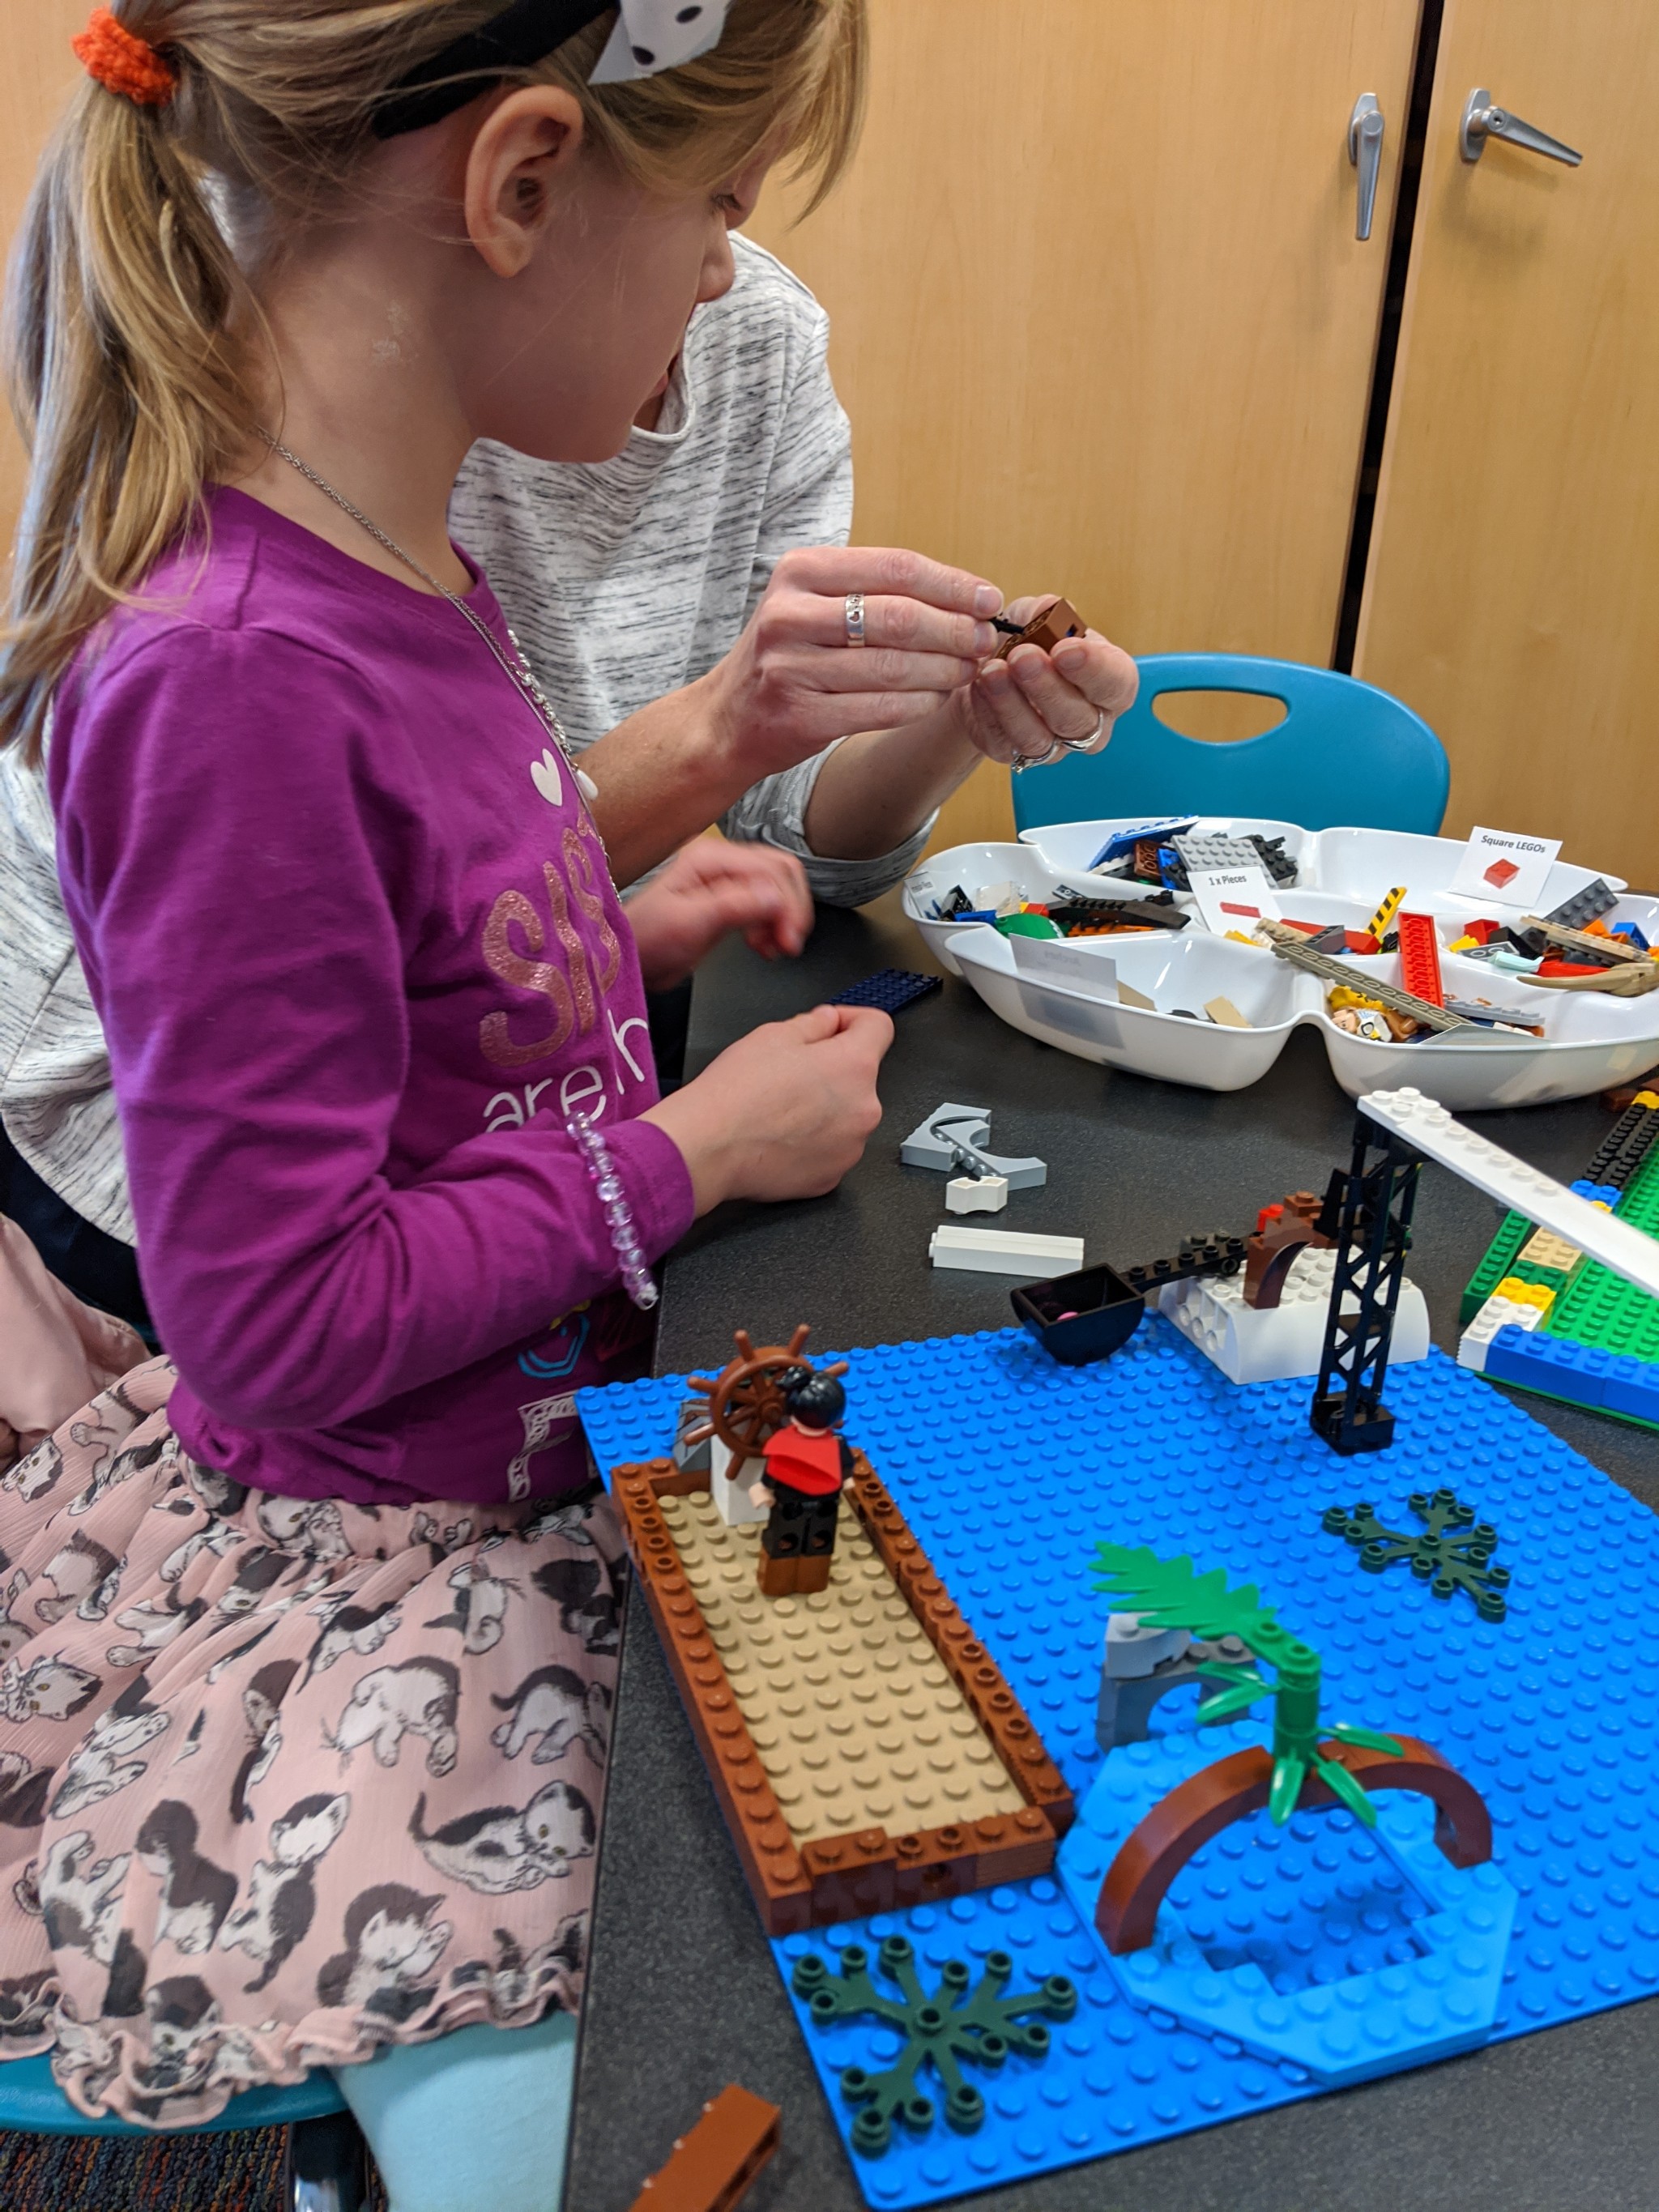 Kids building with LEGOs